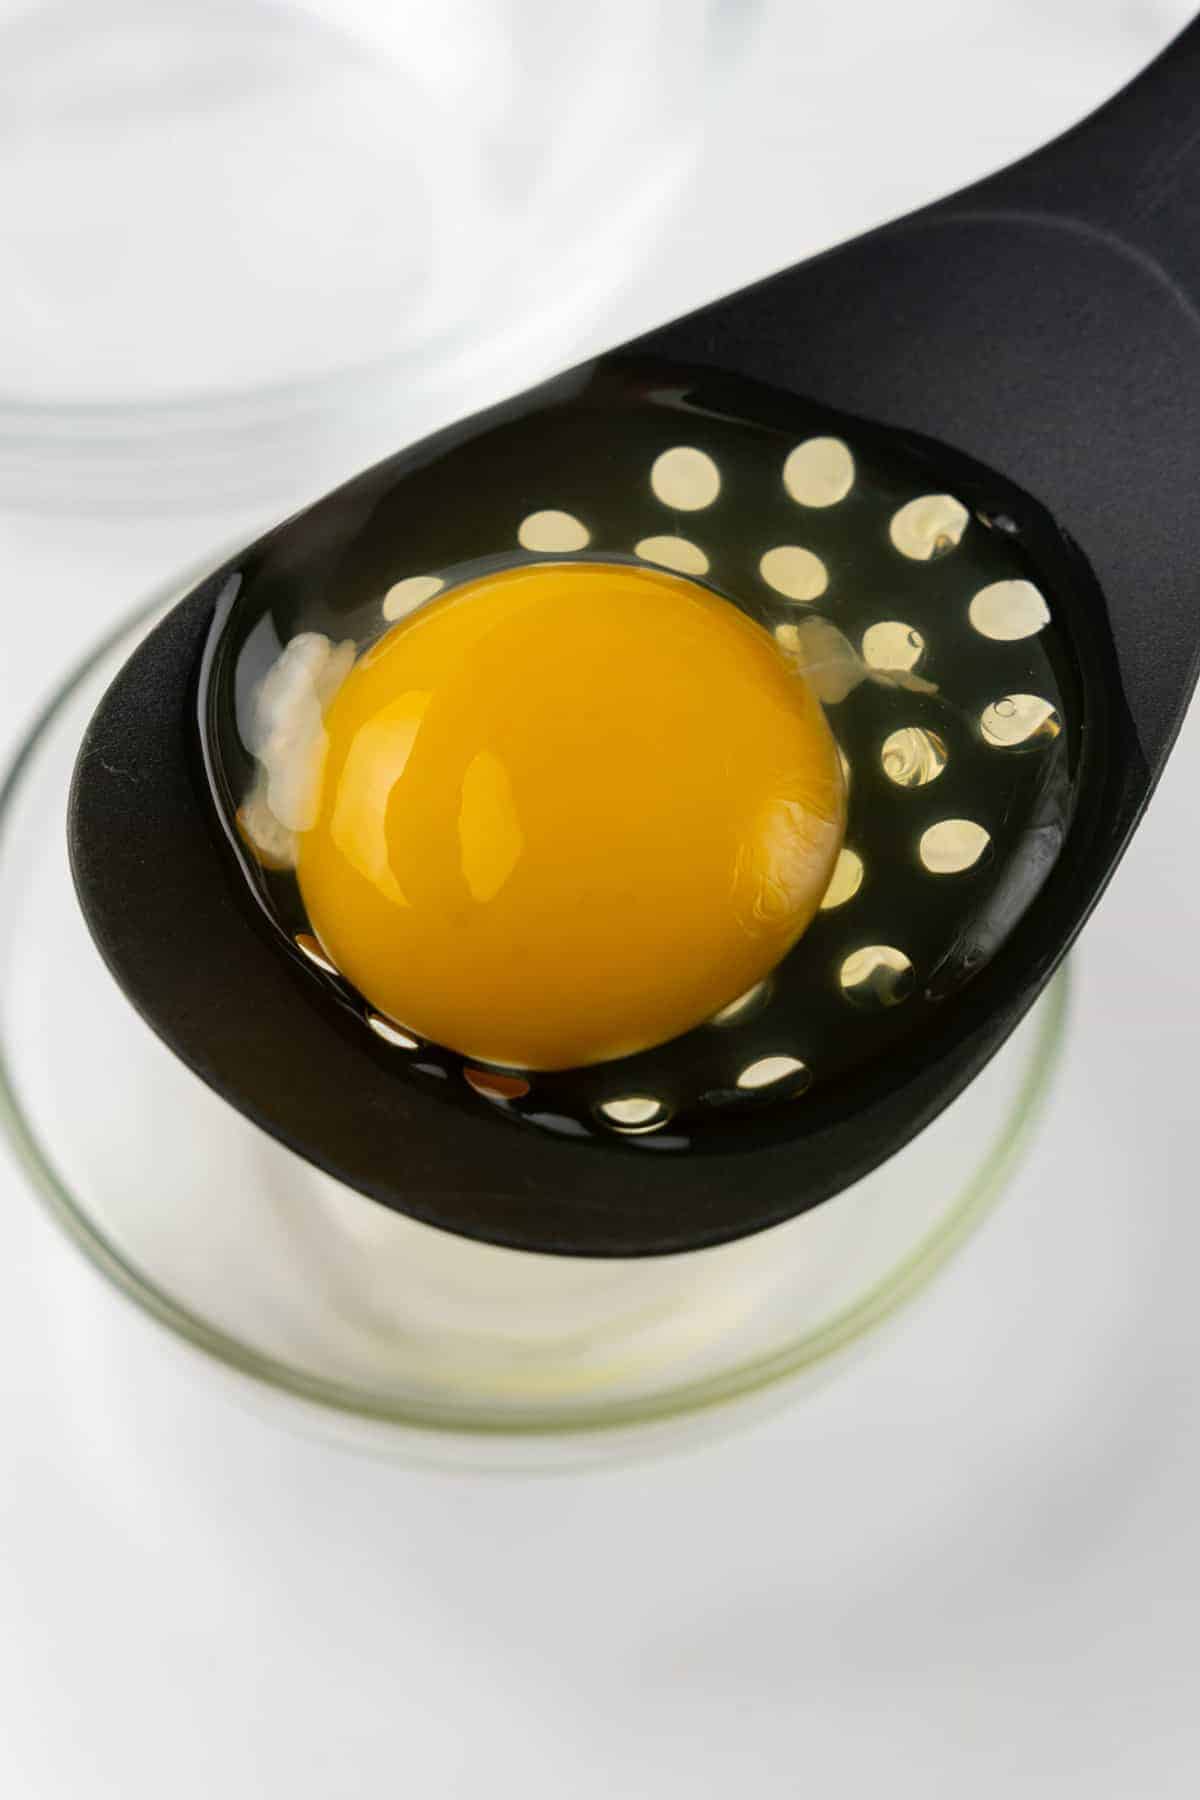 Egg cracked into a black slotted spoon to allow the thin egg whites to drip into a glass ramekin below